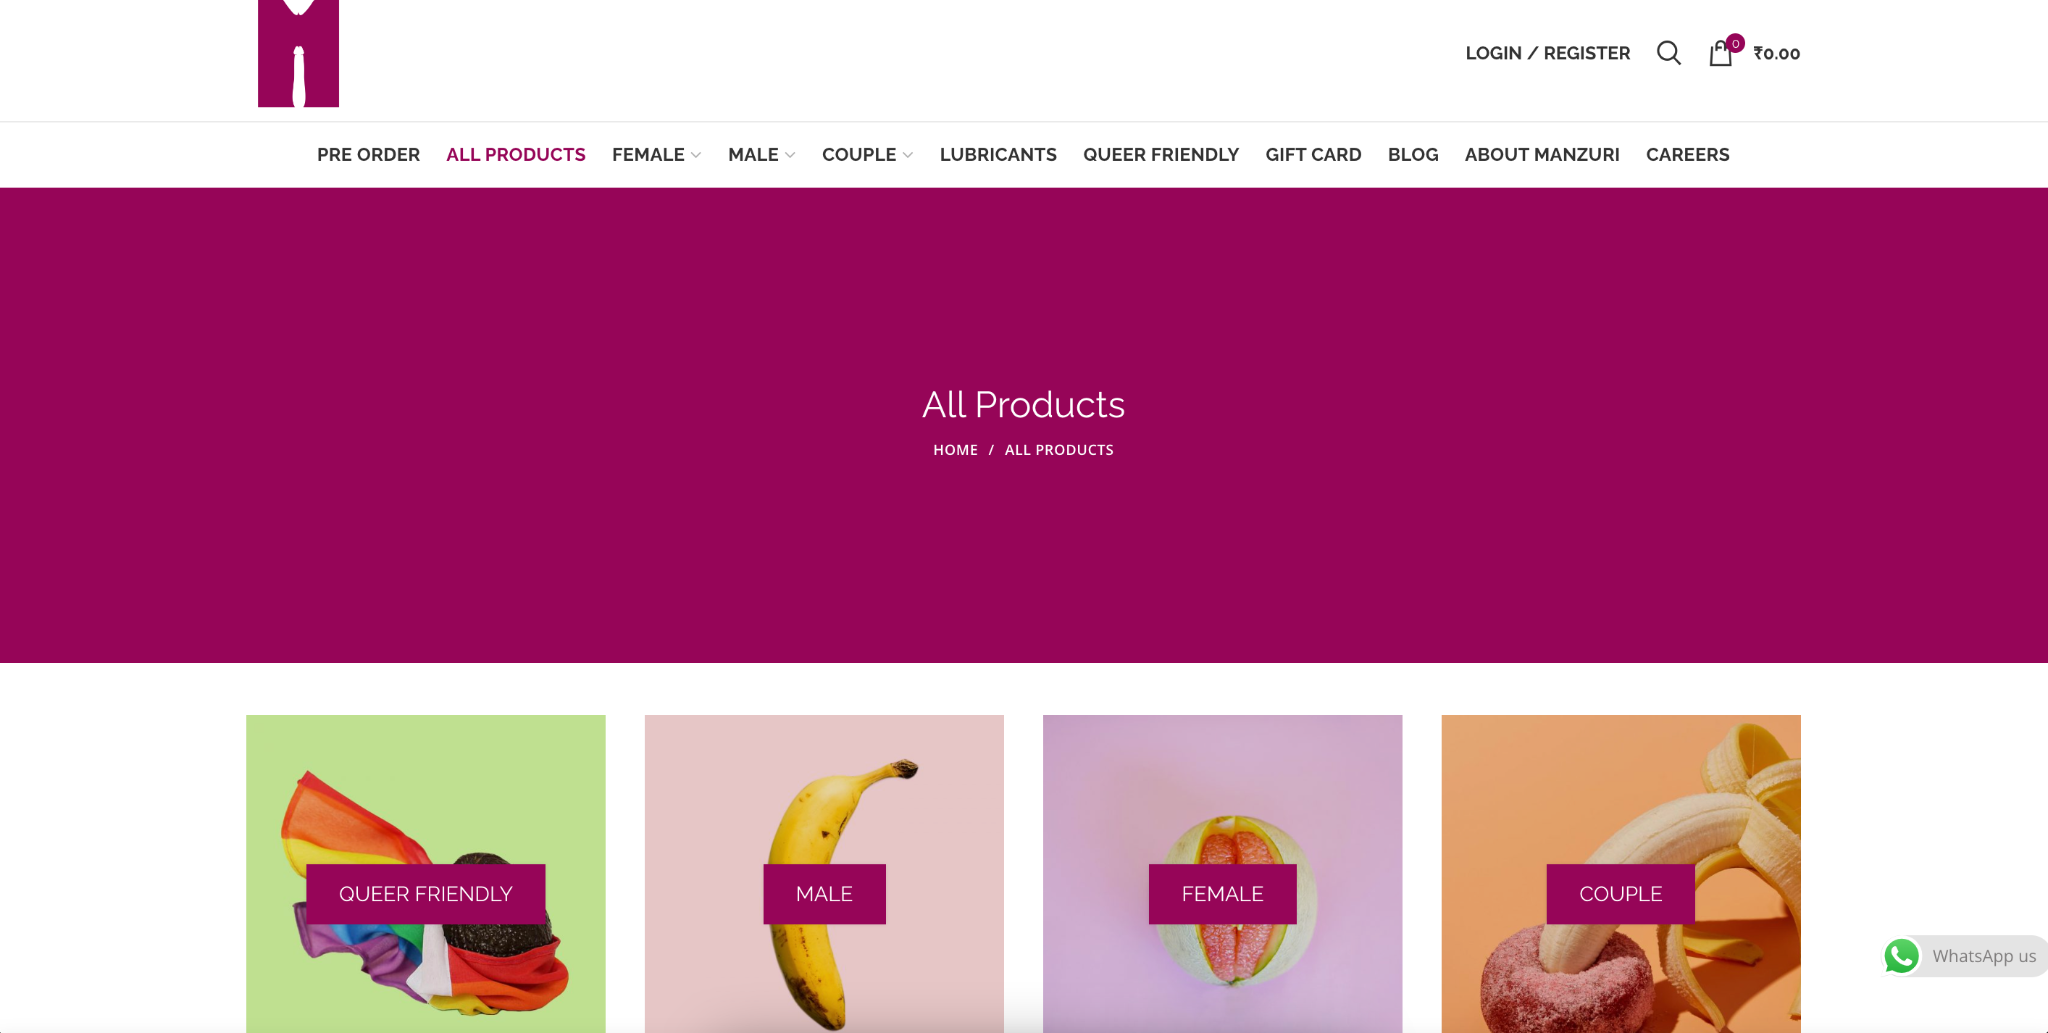 Screengrab showing Manzuri’s website and its categories of products